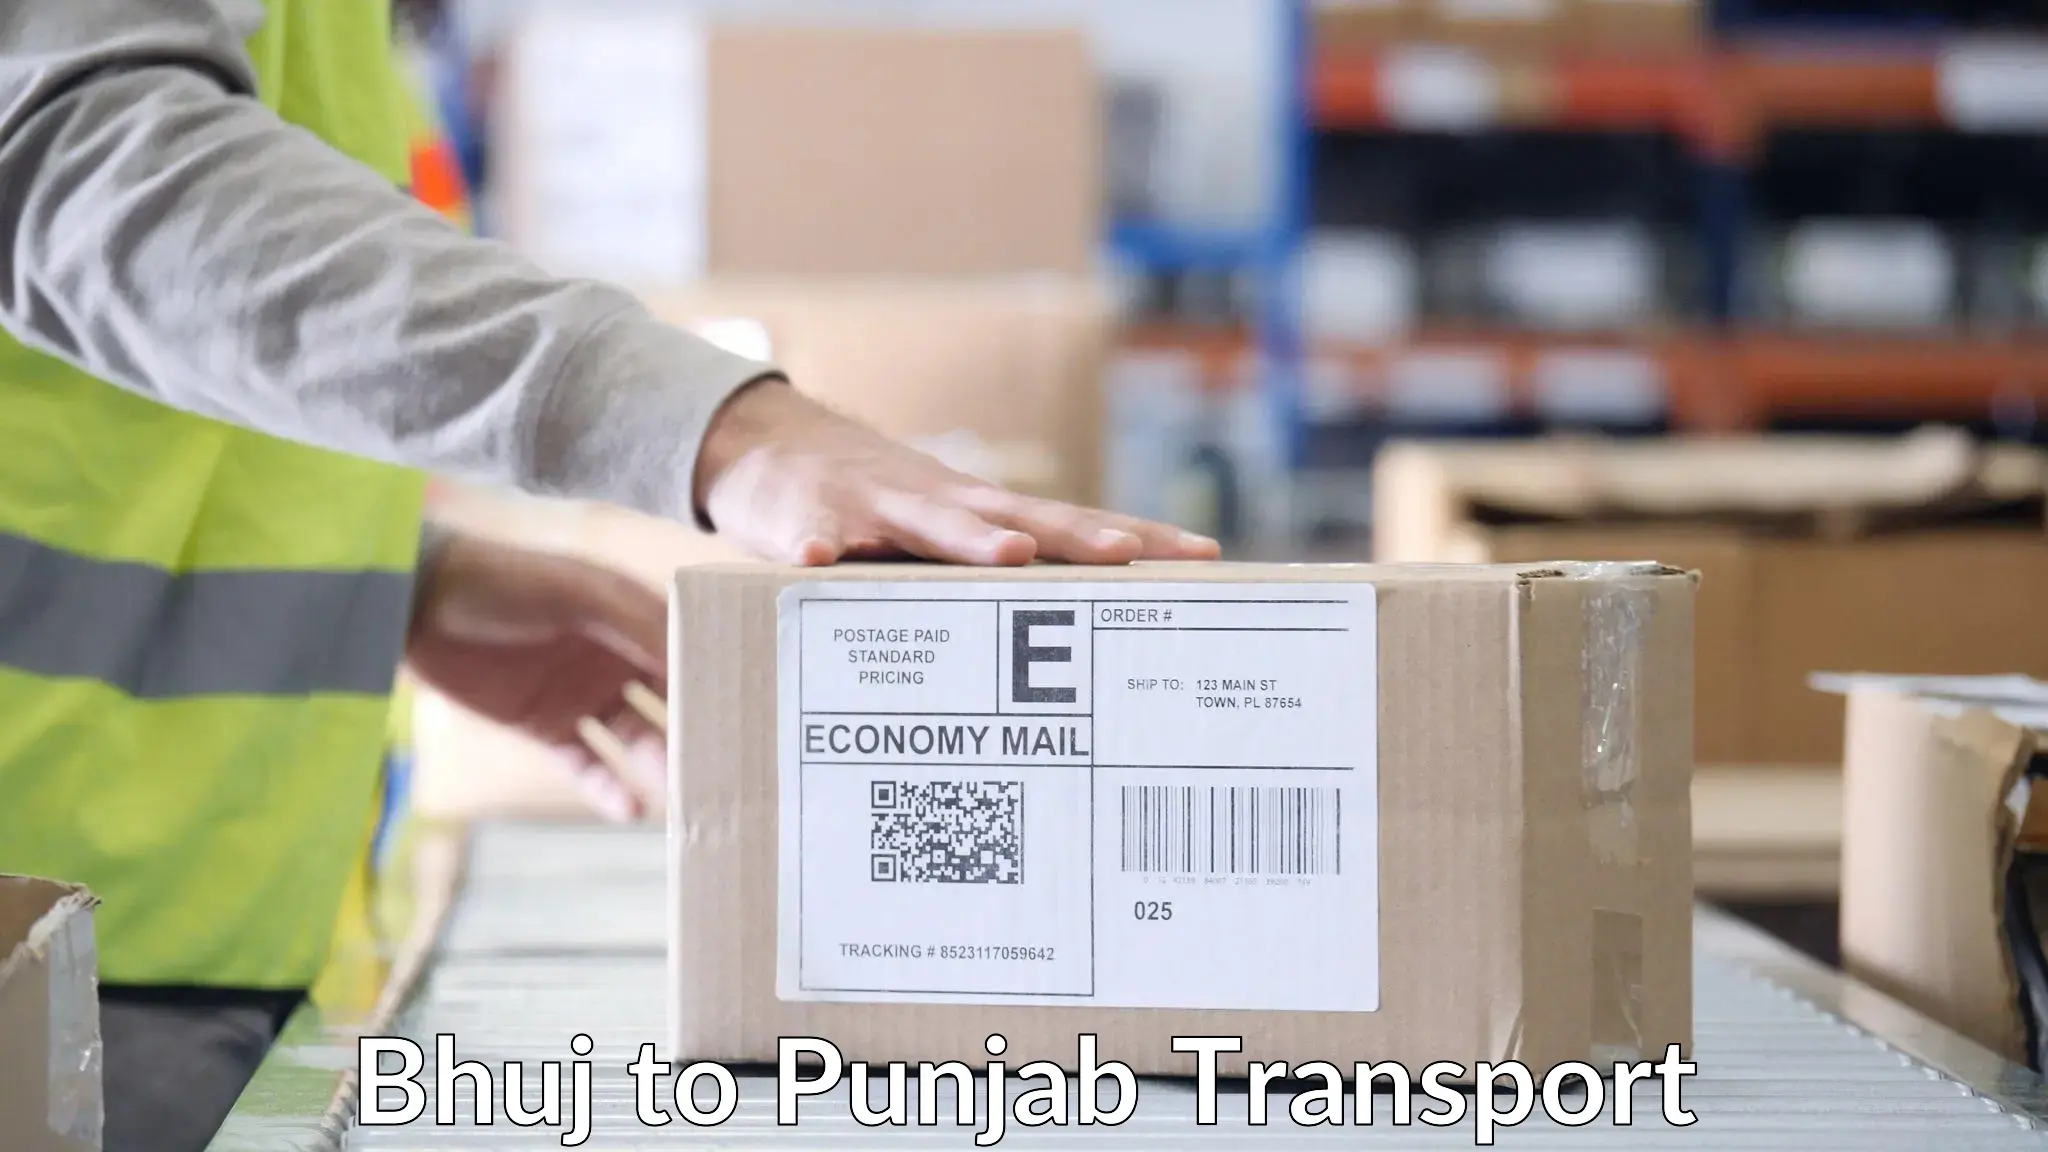 Air freight transport services Bhuj to Goindwal Sahib